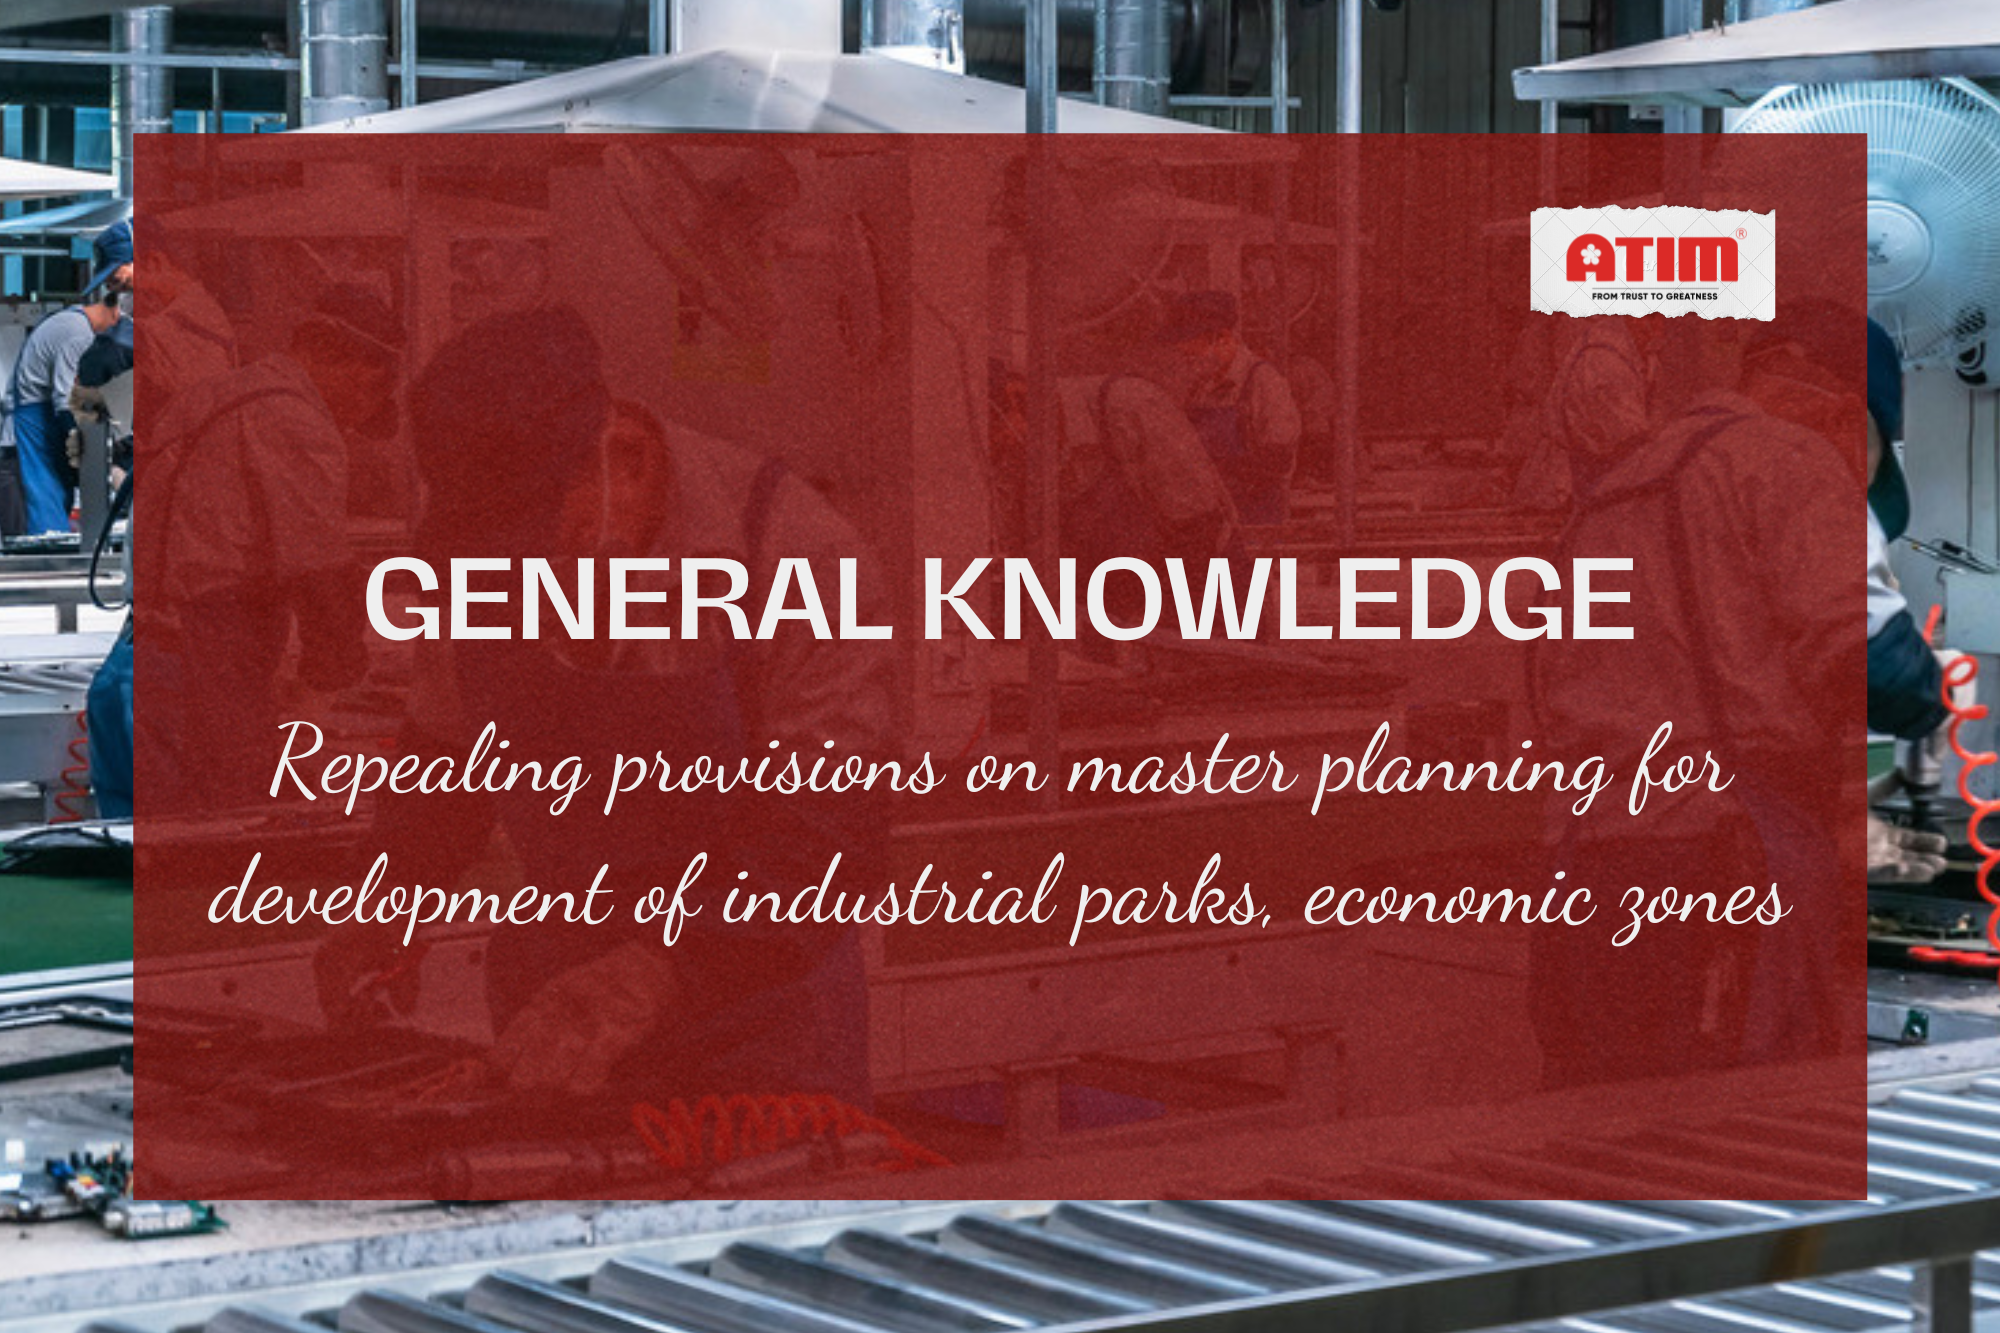 Repealing provisions on master planning for development of industrial parks, economic zones